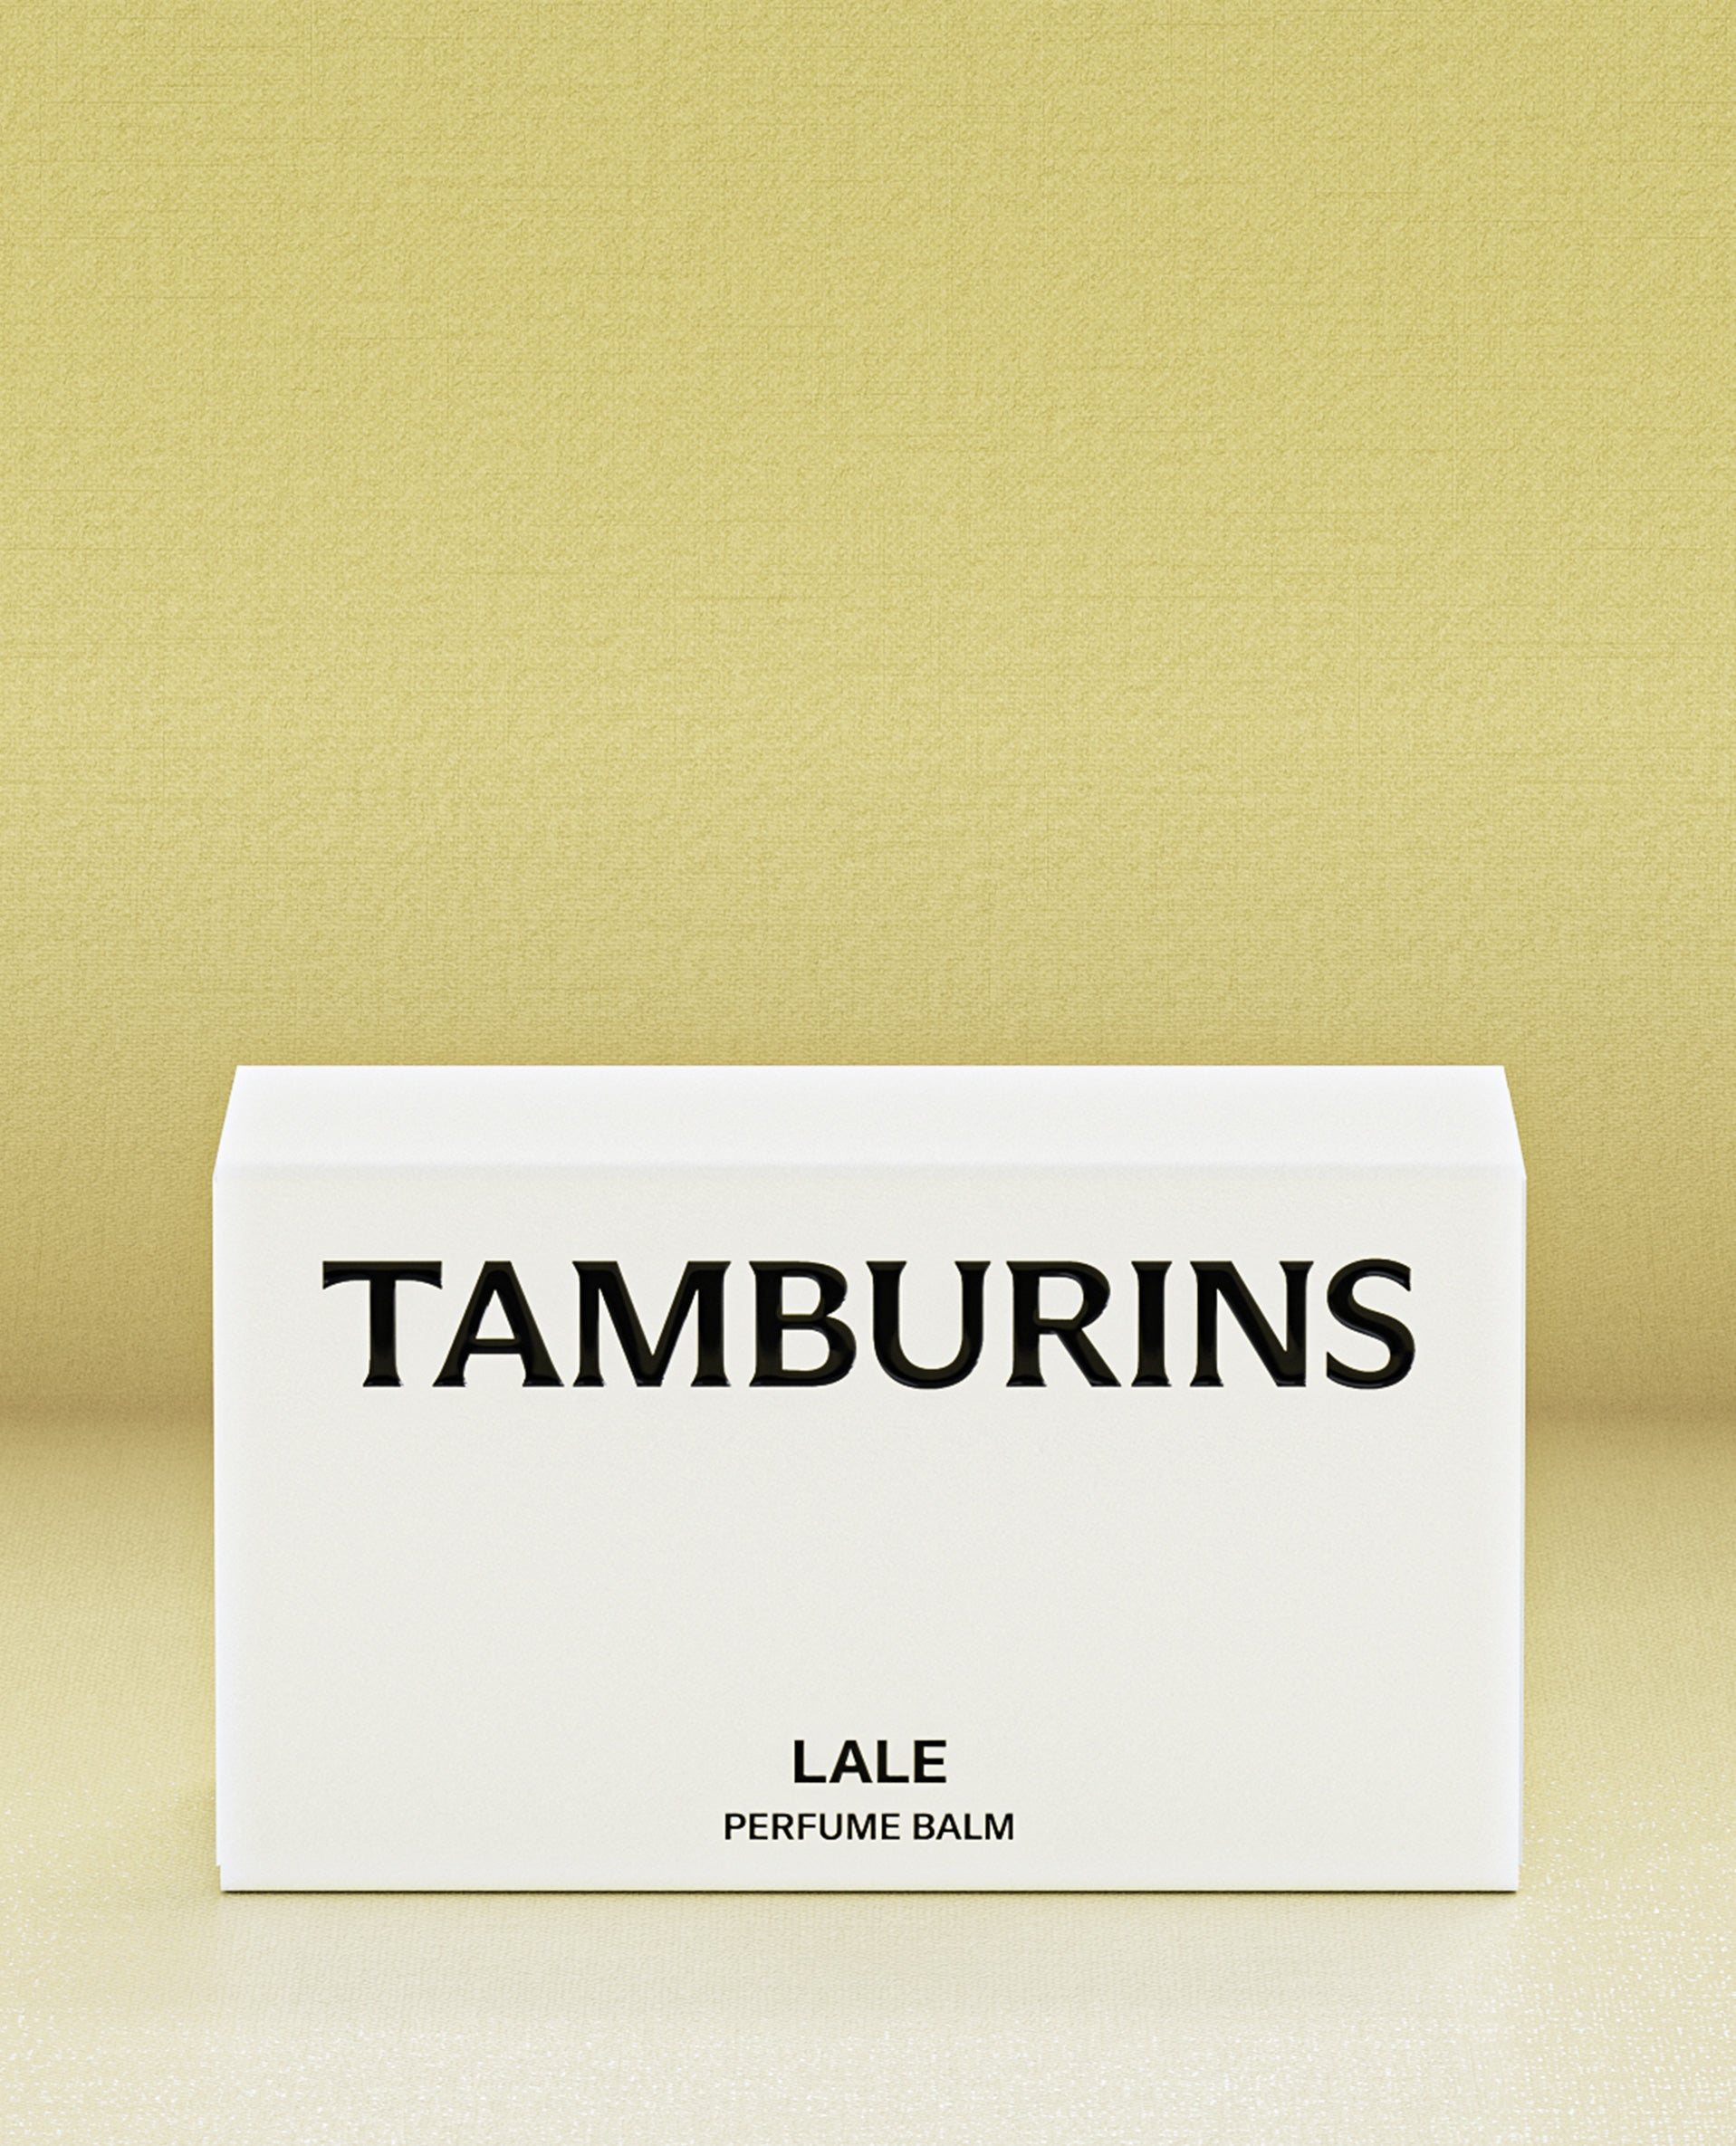 TAMBURINS Perfume Balm LALE 6.5g - a travel-friendly balm with a charming fragrance of LALE in a 6.5g size.